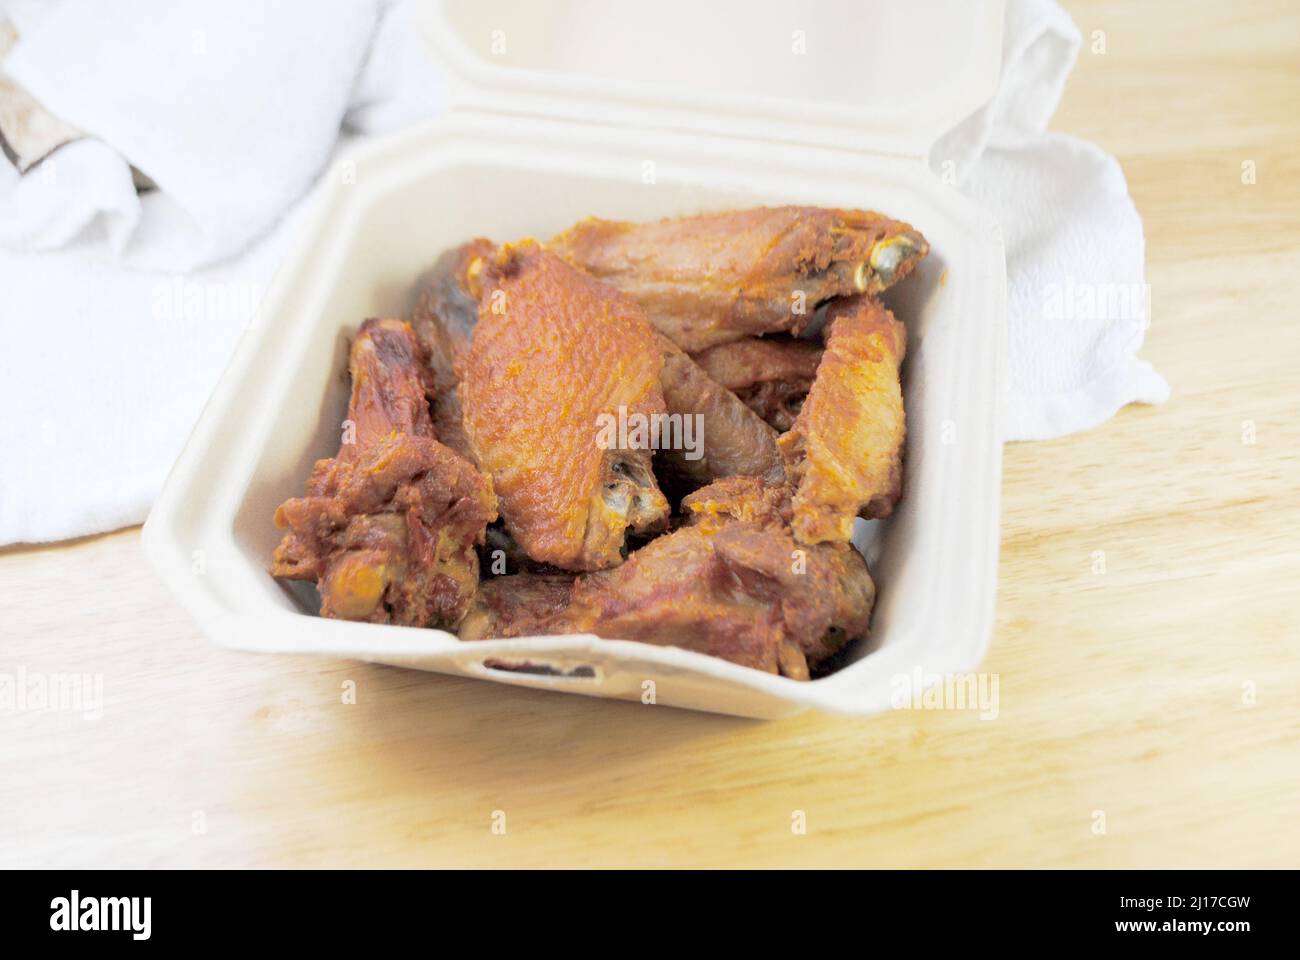 Fingerfood - Frited Chicken Wings in a Takeout Container Stockfoto